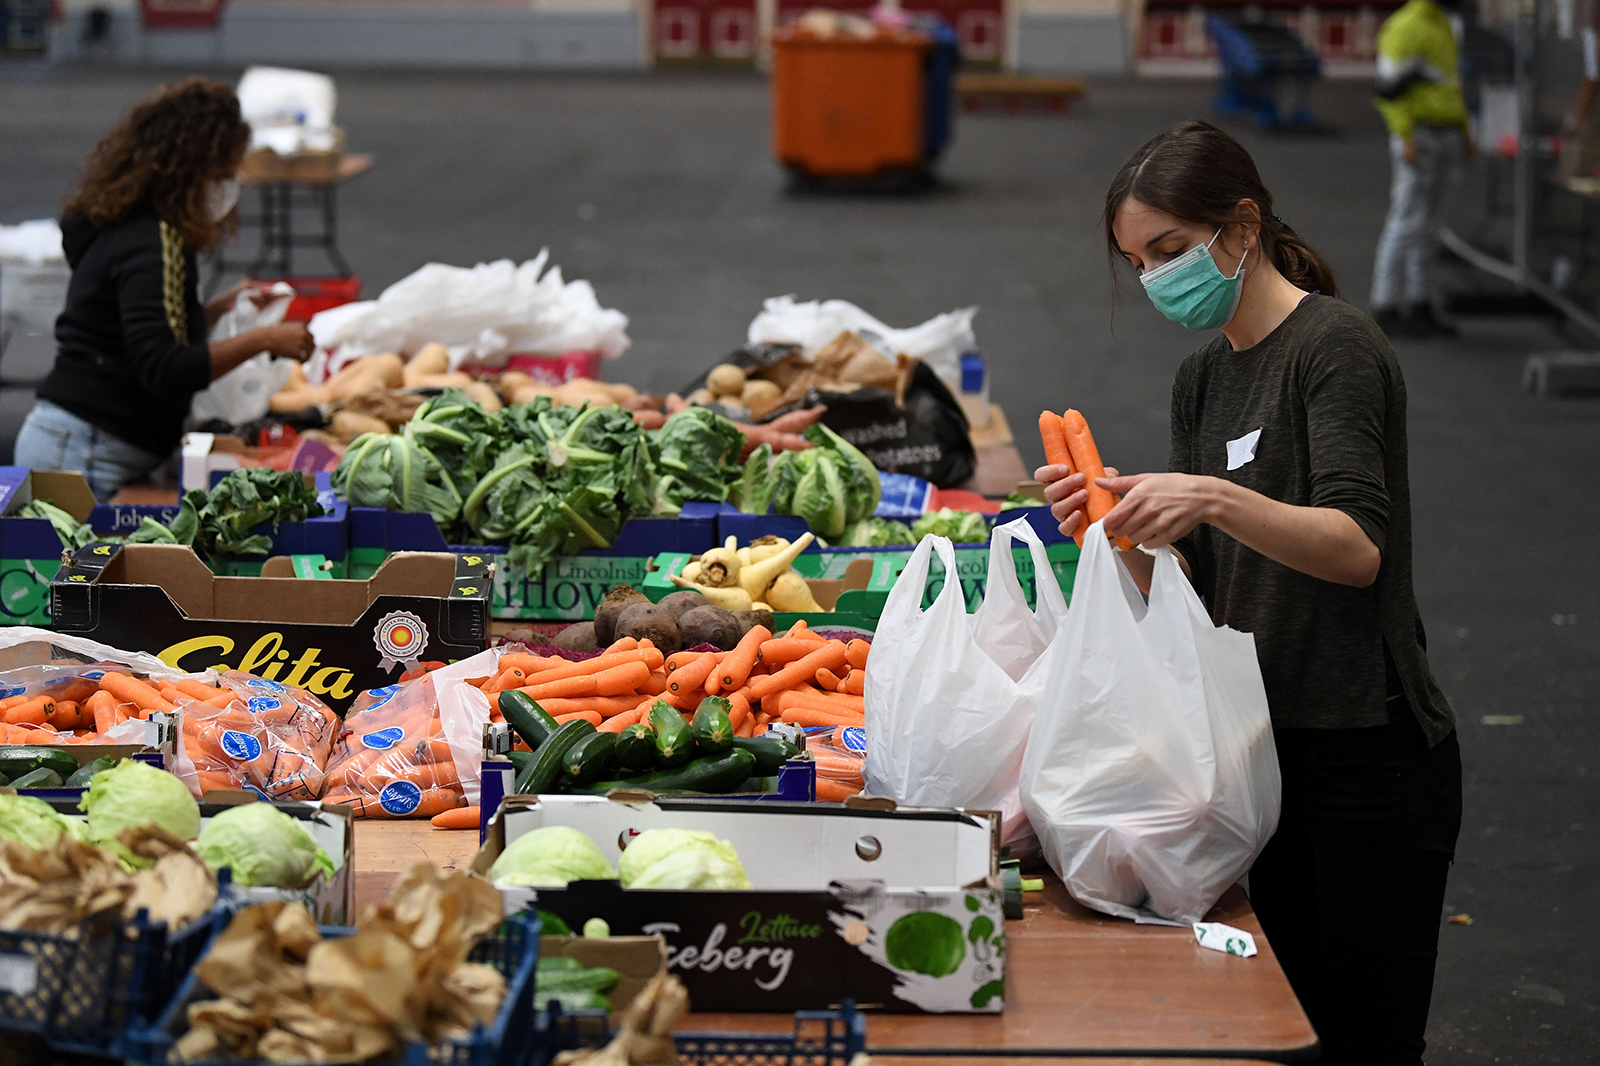 Volunteers sort food and create food parcels for those in need at a temporary food bank center in London on April 29.